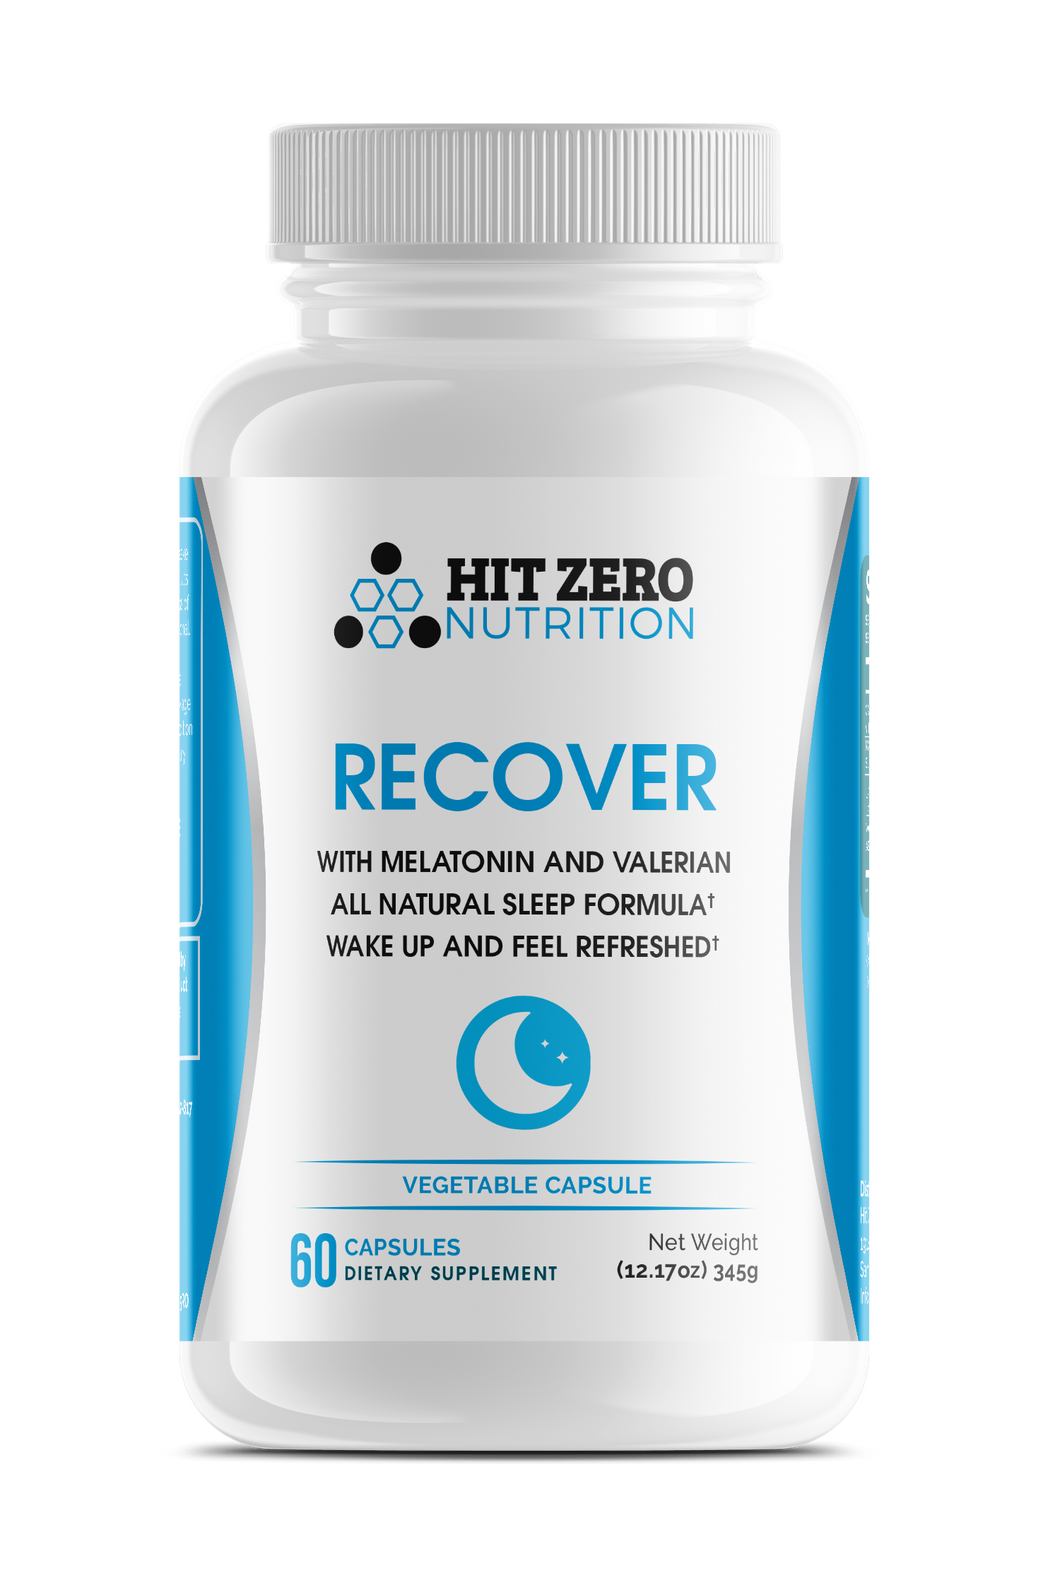 RECOVER Advanced Sleep Support